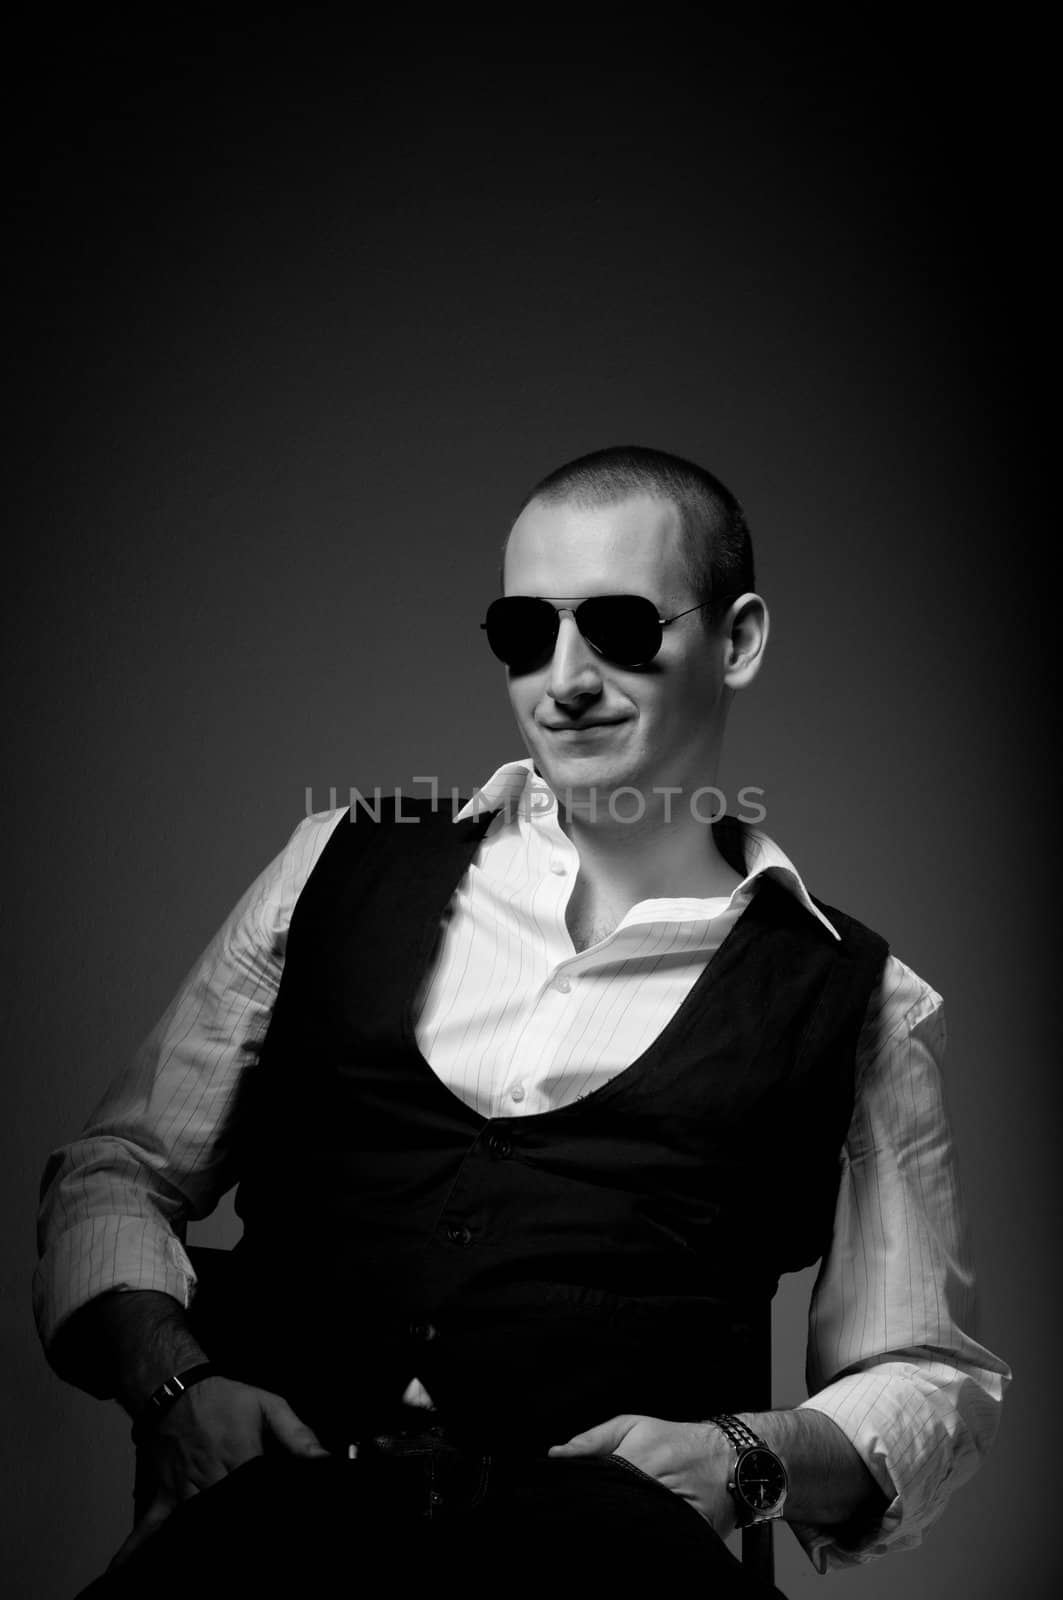 Portrait of a young man wearing sunglasses in black and white by svedoliver